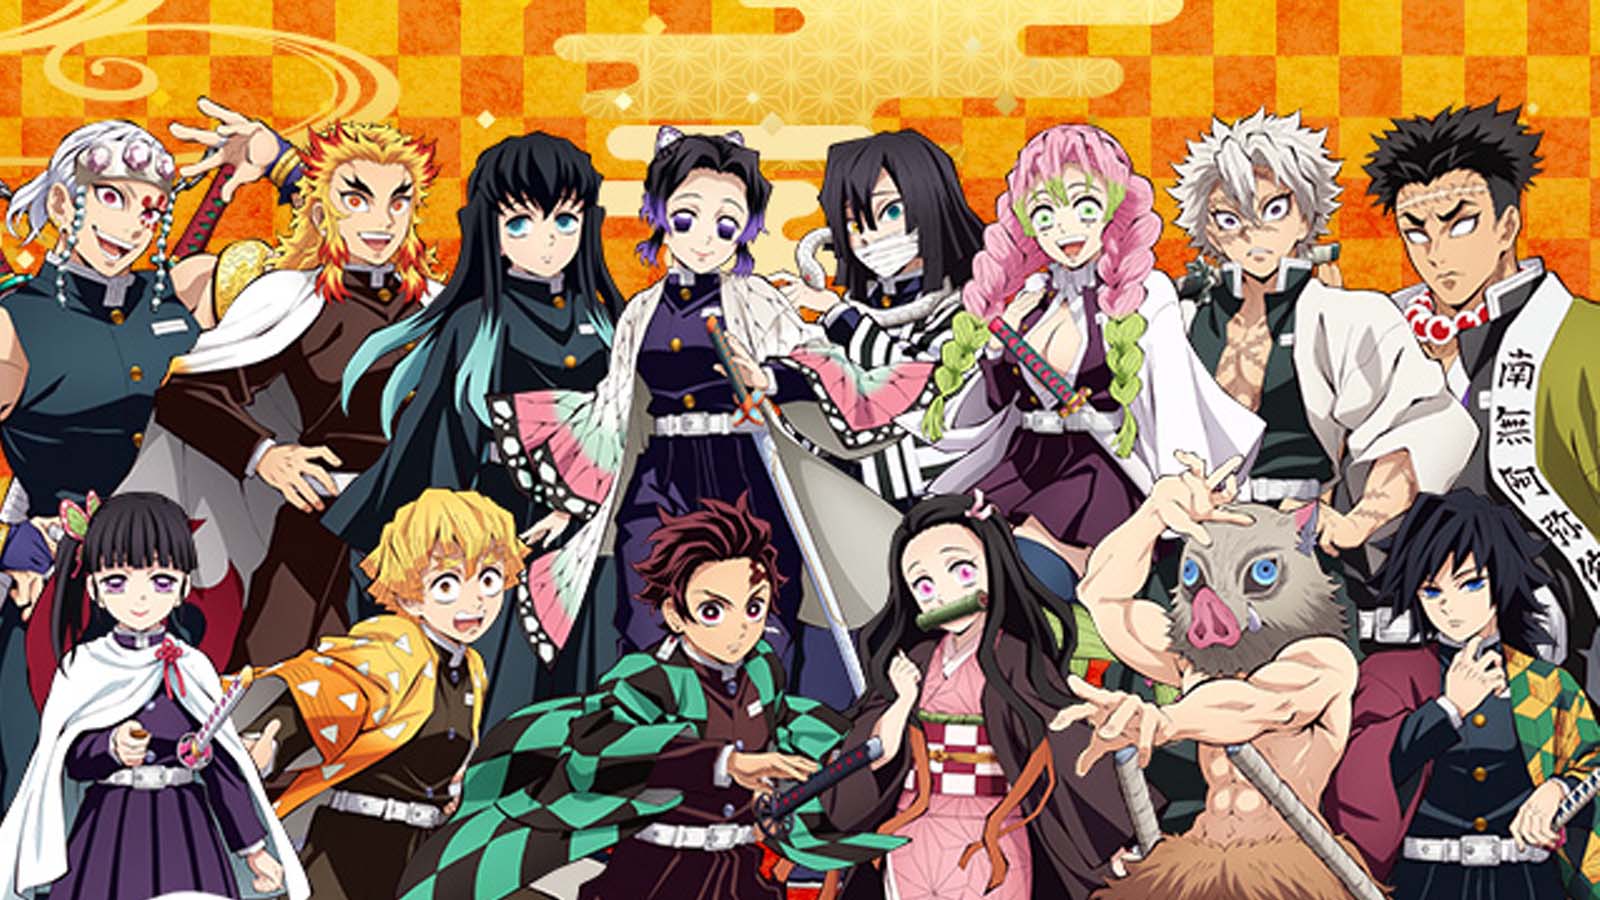 Exciting Update Demon Slayer Anime Gears Up for Season 4 – What to Expect and When